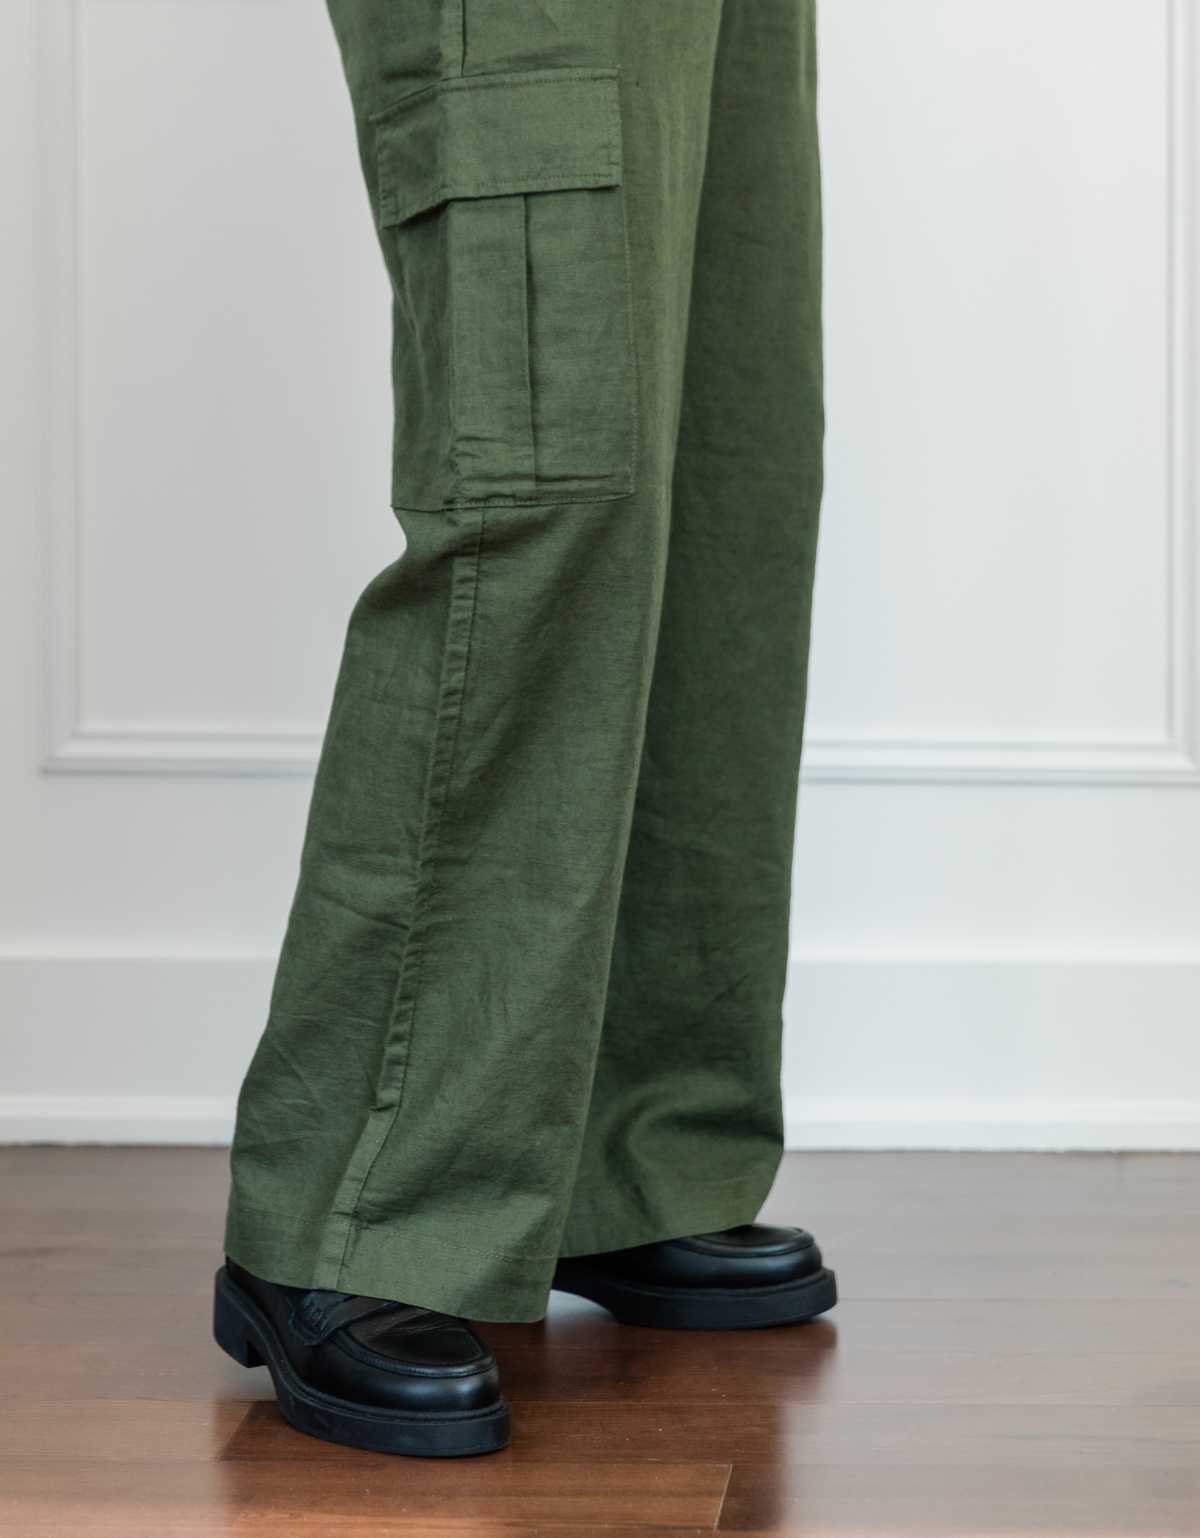 Cropped view of woman's legs wearing black chunky loafers with full length wide olive green linen pants.